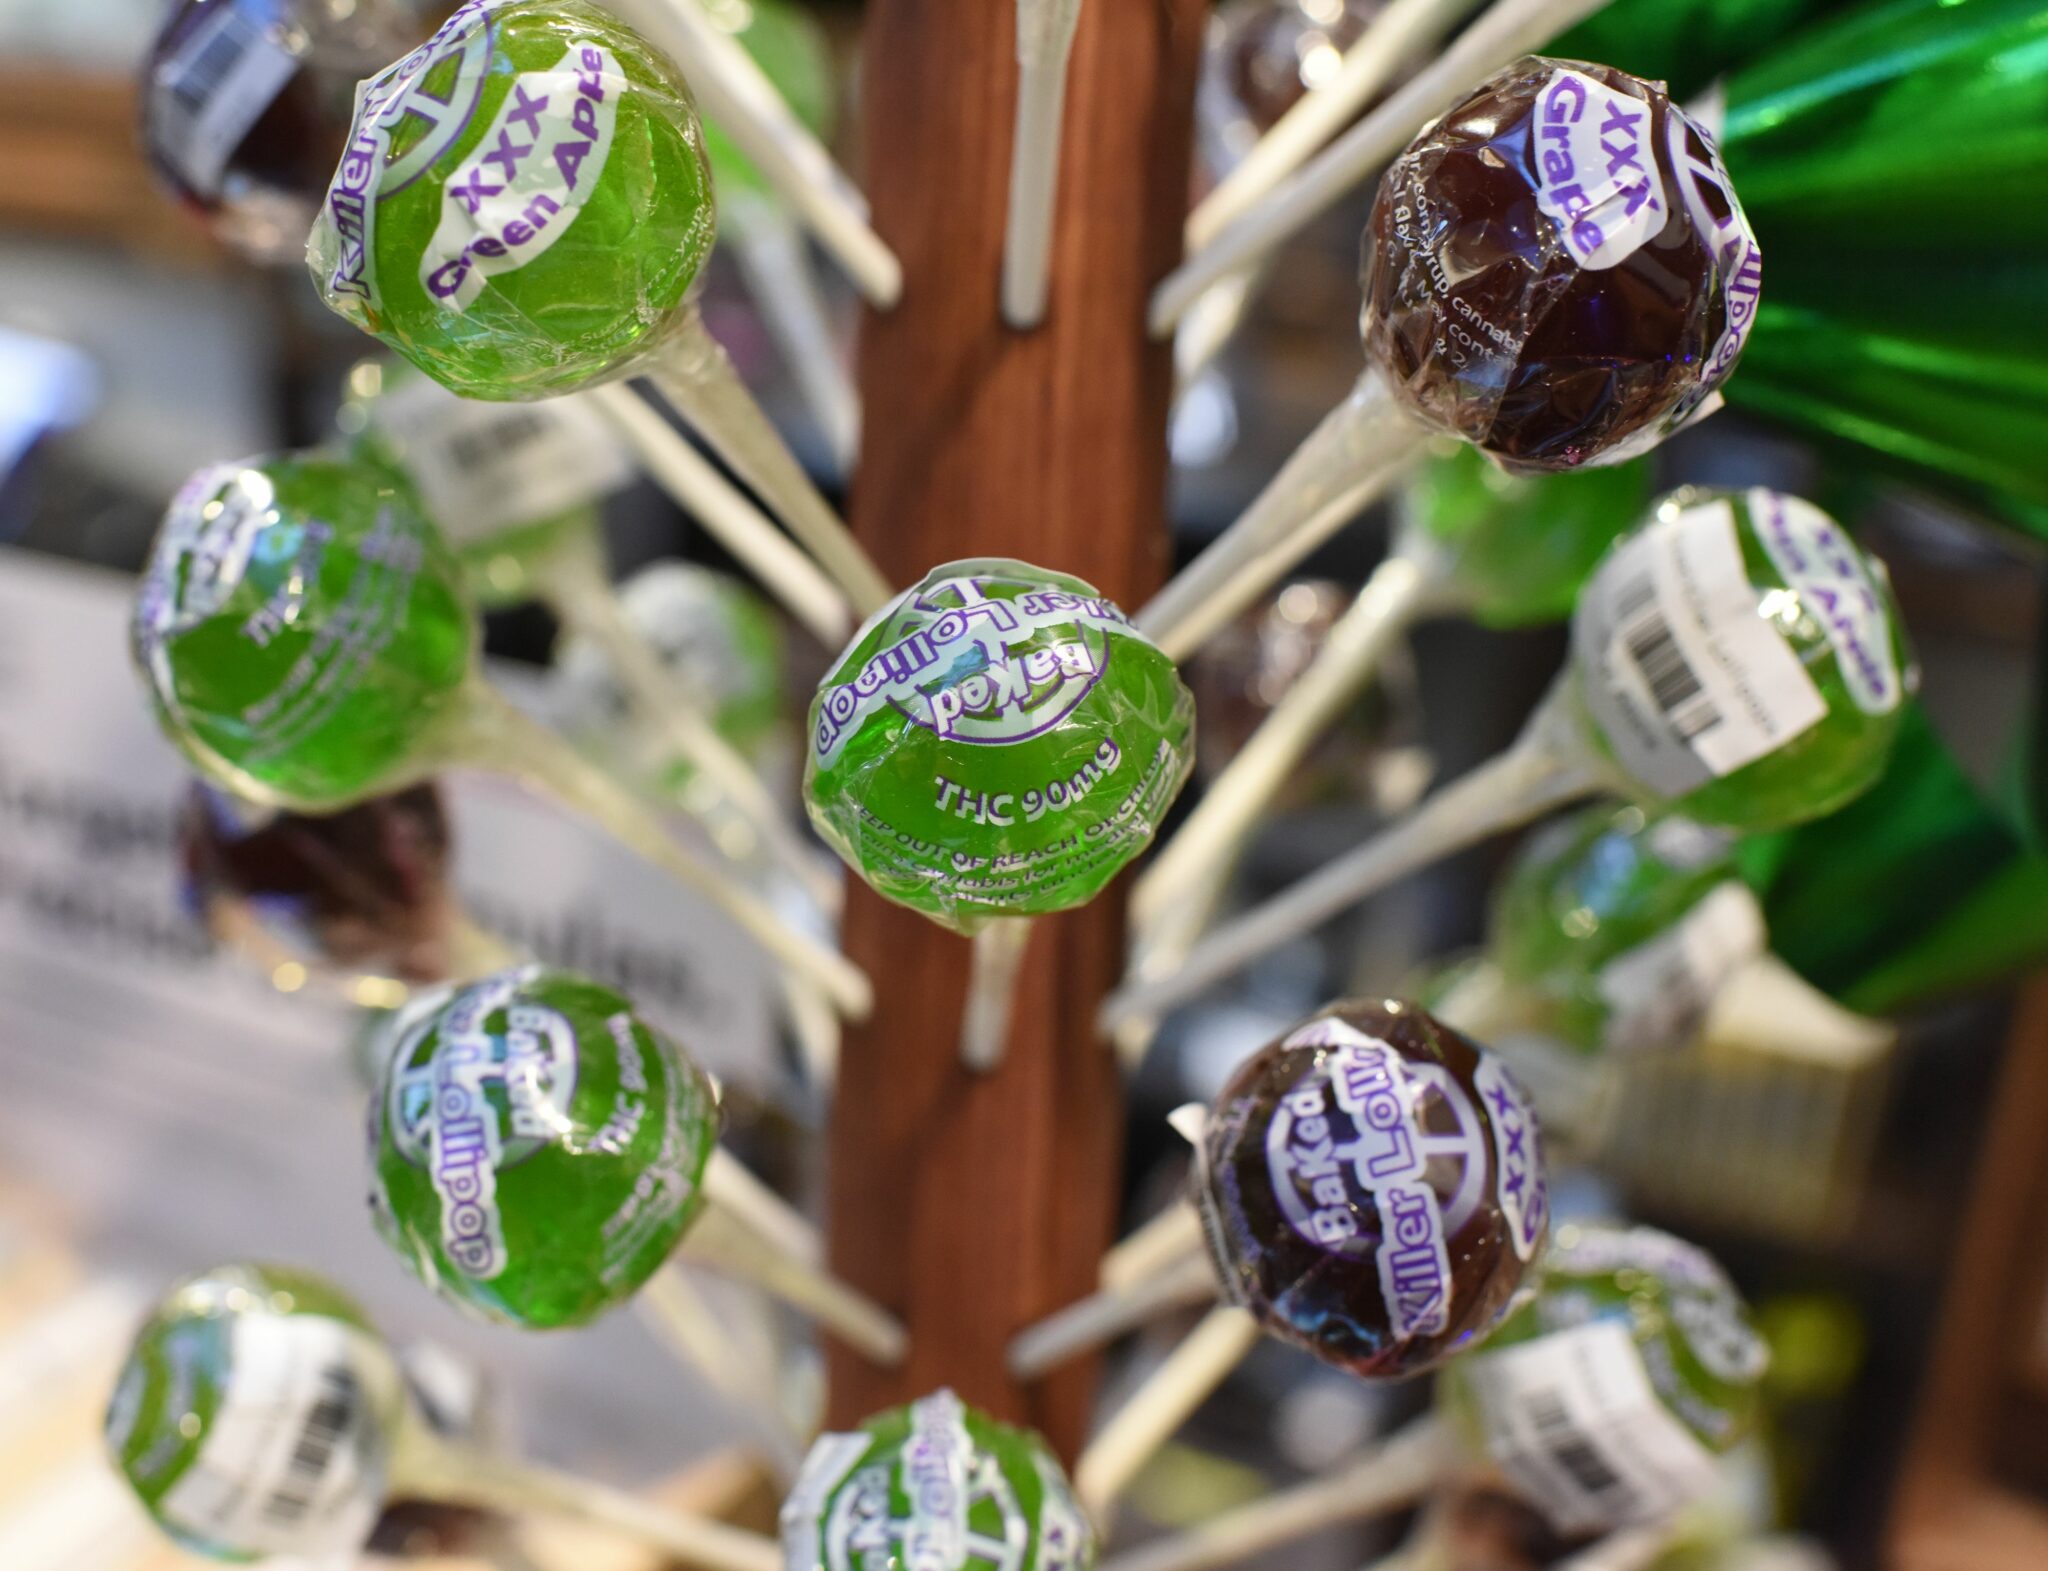 BaKed Lollipops with 90mg each of THC, the chemical component in cannabis responsible for making users high, are for sale at the Higher Path medical marijuana dispensary in the San Fernando Valley area of Los Angeles, California, December 27, 2017. - At the stroke of midnight on January 1, pot lovers in California may raise a joint, instead of a glass of champagne. America's wealthiest state is legalizing the growth, sale and consumption of recreational marijuana, opening the door to the world's biggest market. (Photo by Robyn Beck / AFP)        (Photo credit should read ROBYN BECK/AFP via Getty Images)